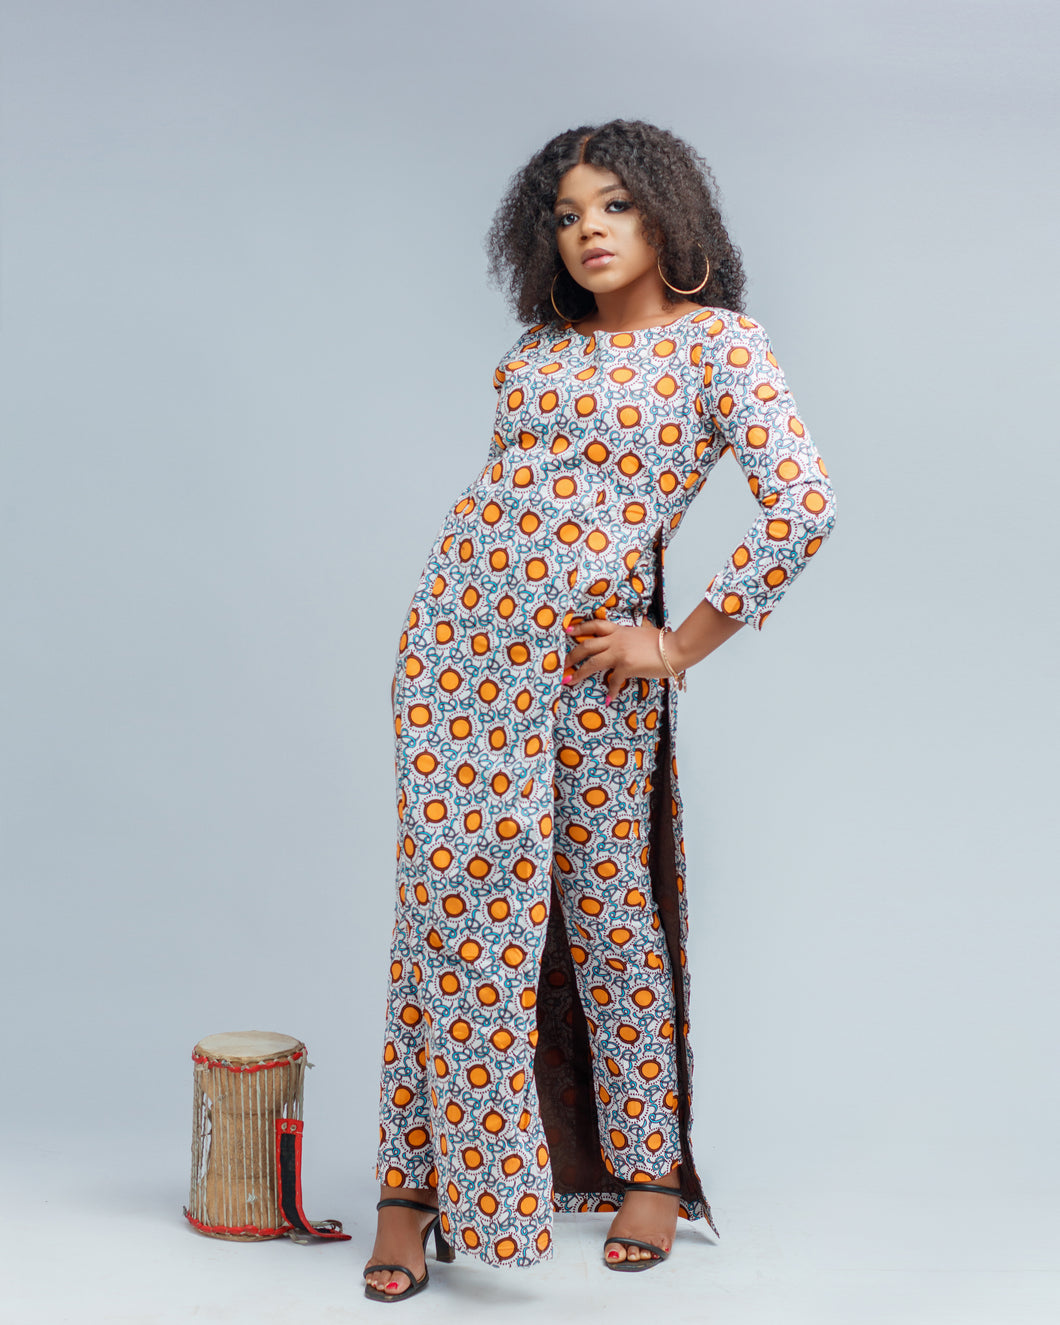 Yara African print top with matching pant trousers